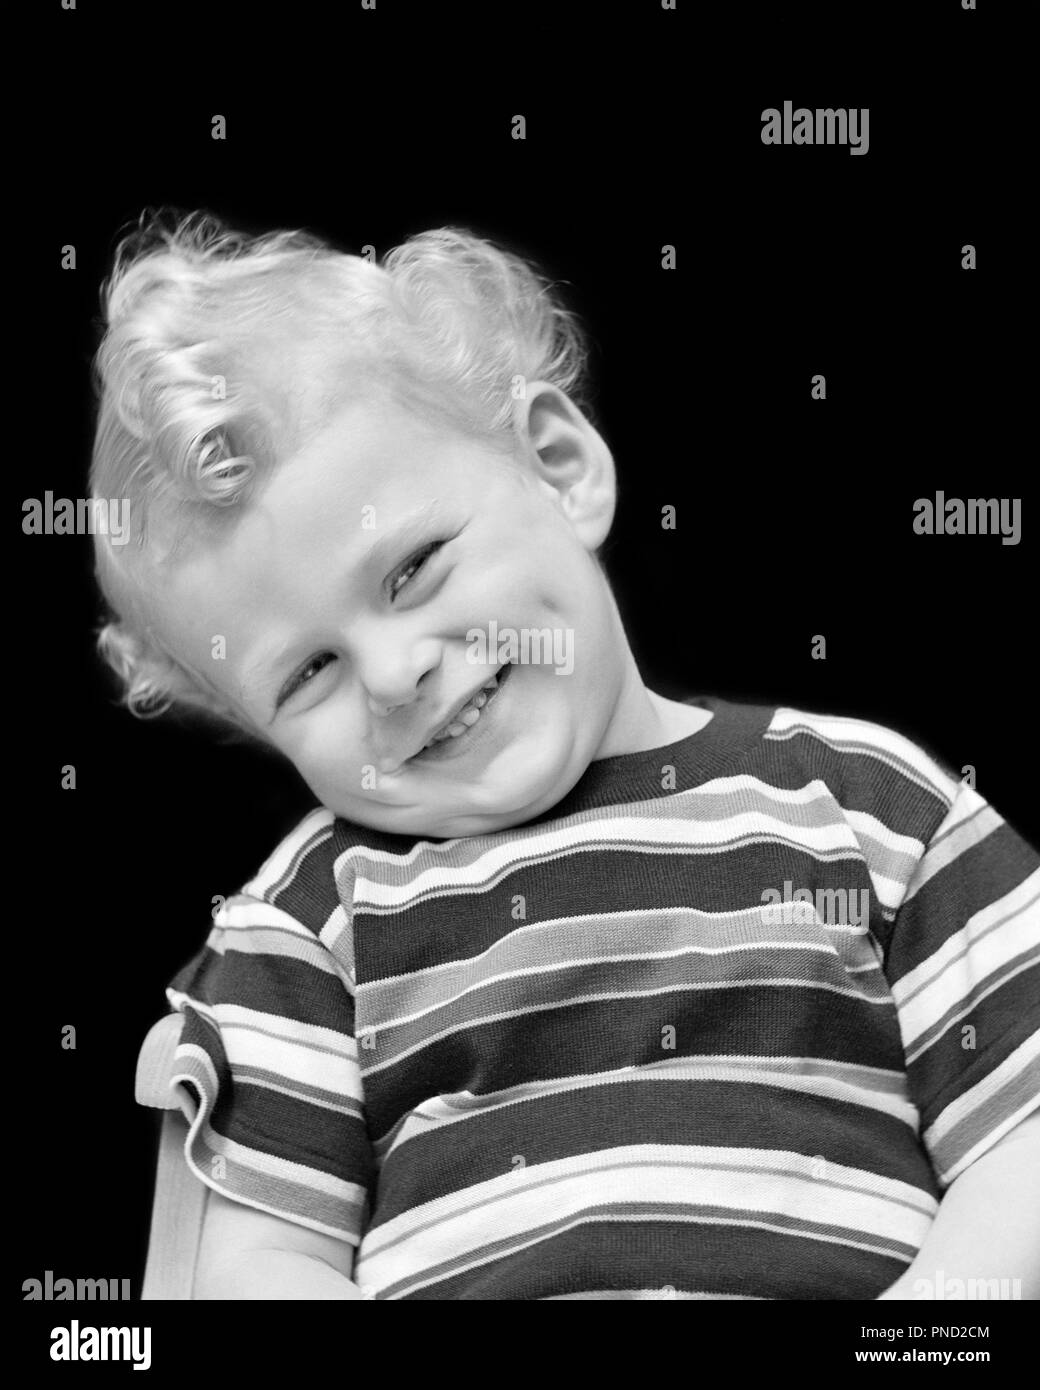 1940s PORTRAIT OF SMILING BOY WITH BLOND CURLY HAIR HEAD COCKED TO SIDE WEARING STRIPED TEE-SHIRT LOOKING AT CAMERA - j9582 HAR001 HARS PLEASED JOY LIFESTYLE STRIPED HEALTHINESS HOME LIFE HALF-LENGTH MALES EXPRESSIONS B&W EYE CONTACT ACTIVITY HAPPINESS PHYSICAL CHEERFUL STRENGTH CURLY OF SMILES FLEXIBILITY JOYFUL MUSCLES STYLISH CHARMING JUVENILES BLACK AND WHITE CAUCASIAN ETHNICITY HAR001 OLD FASHIONED Stock Photo